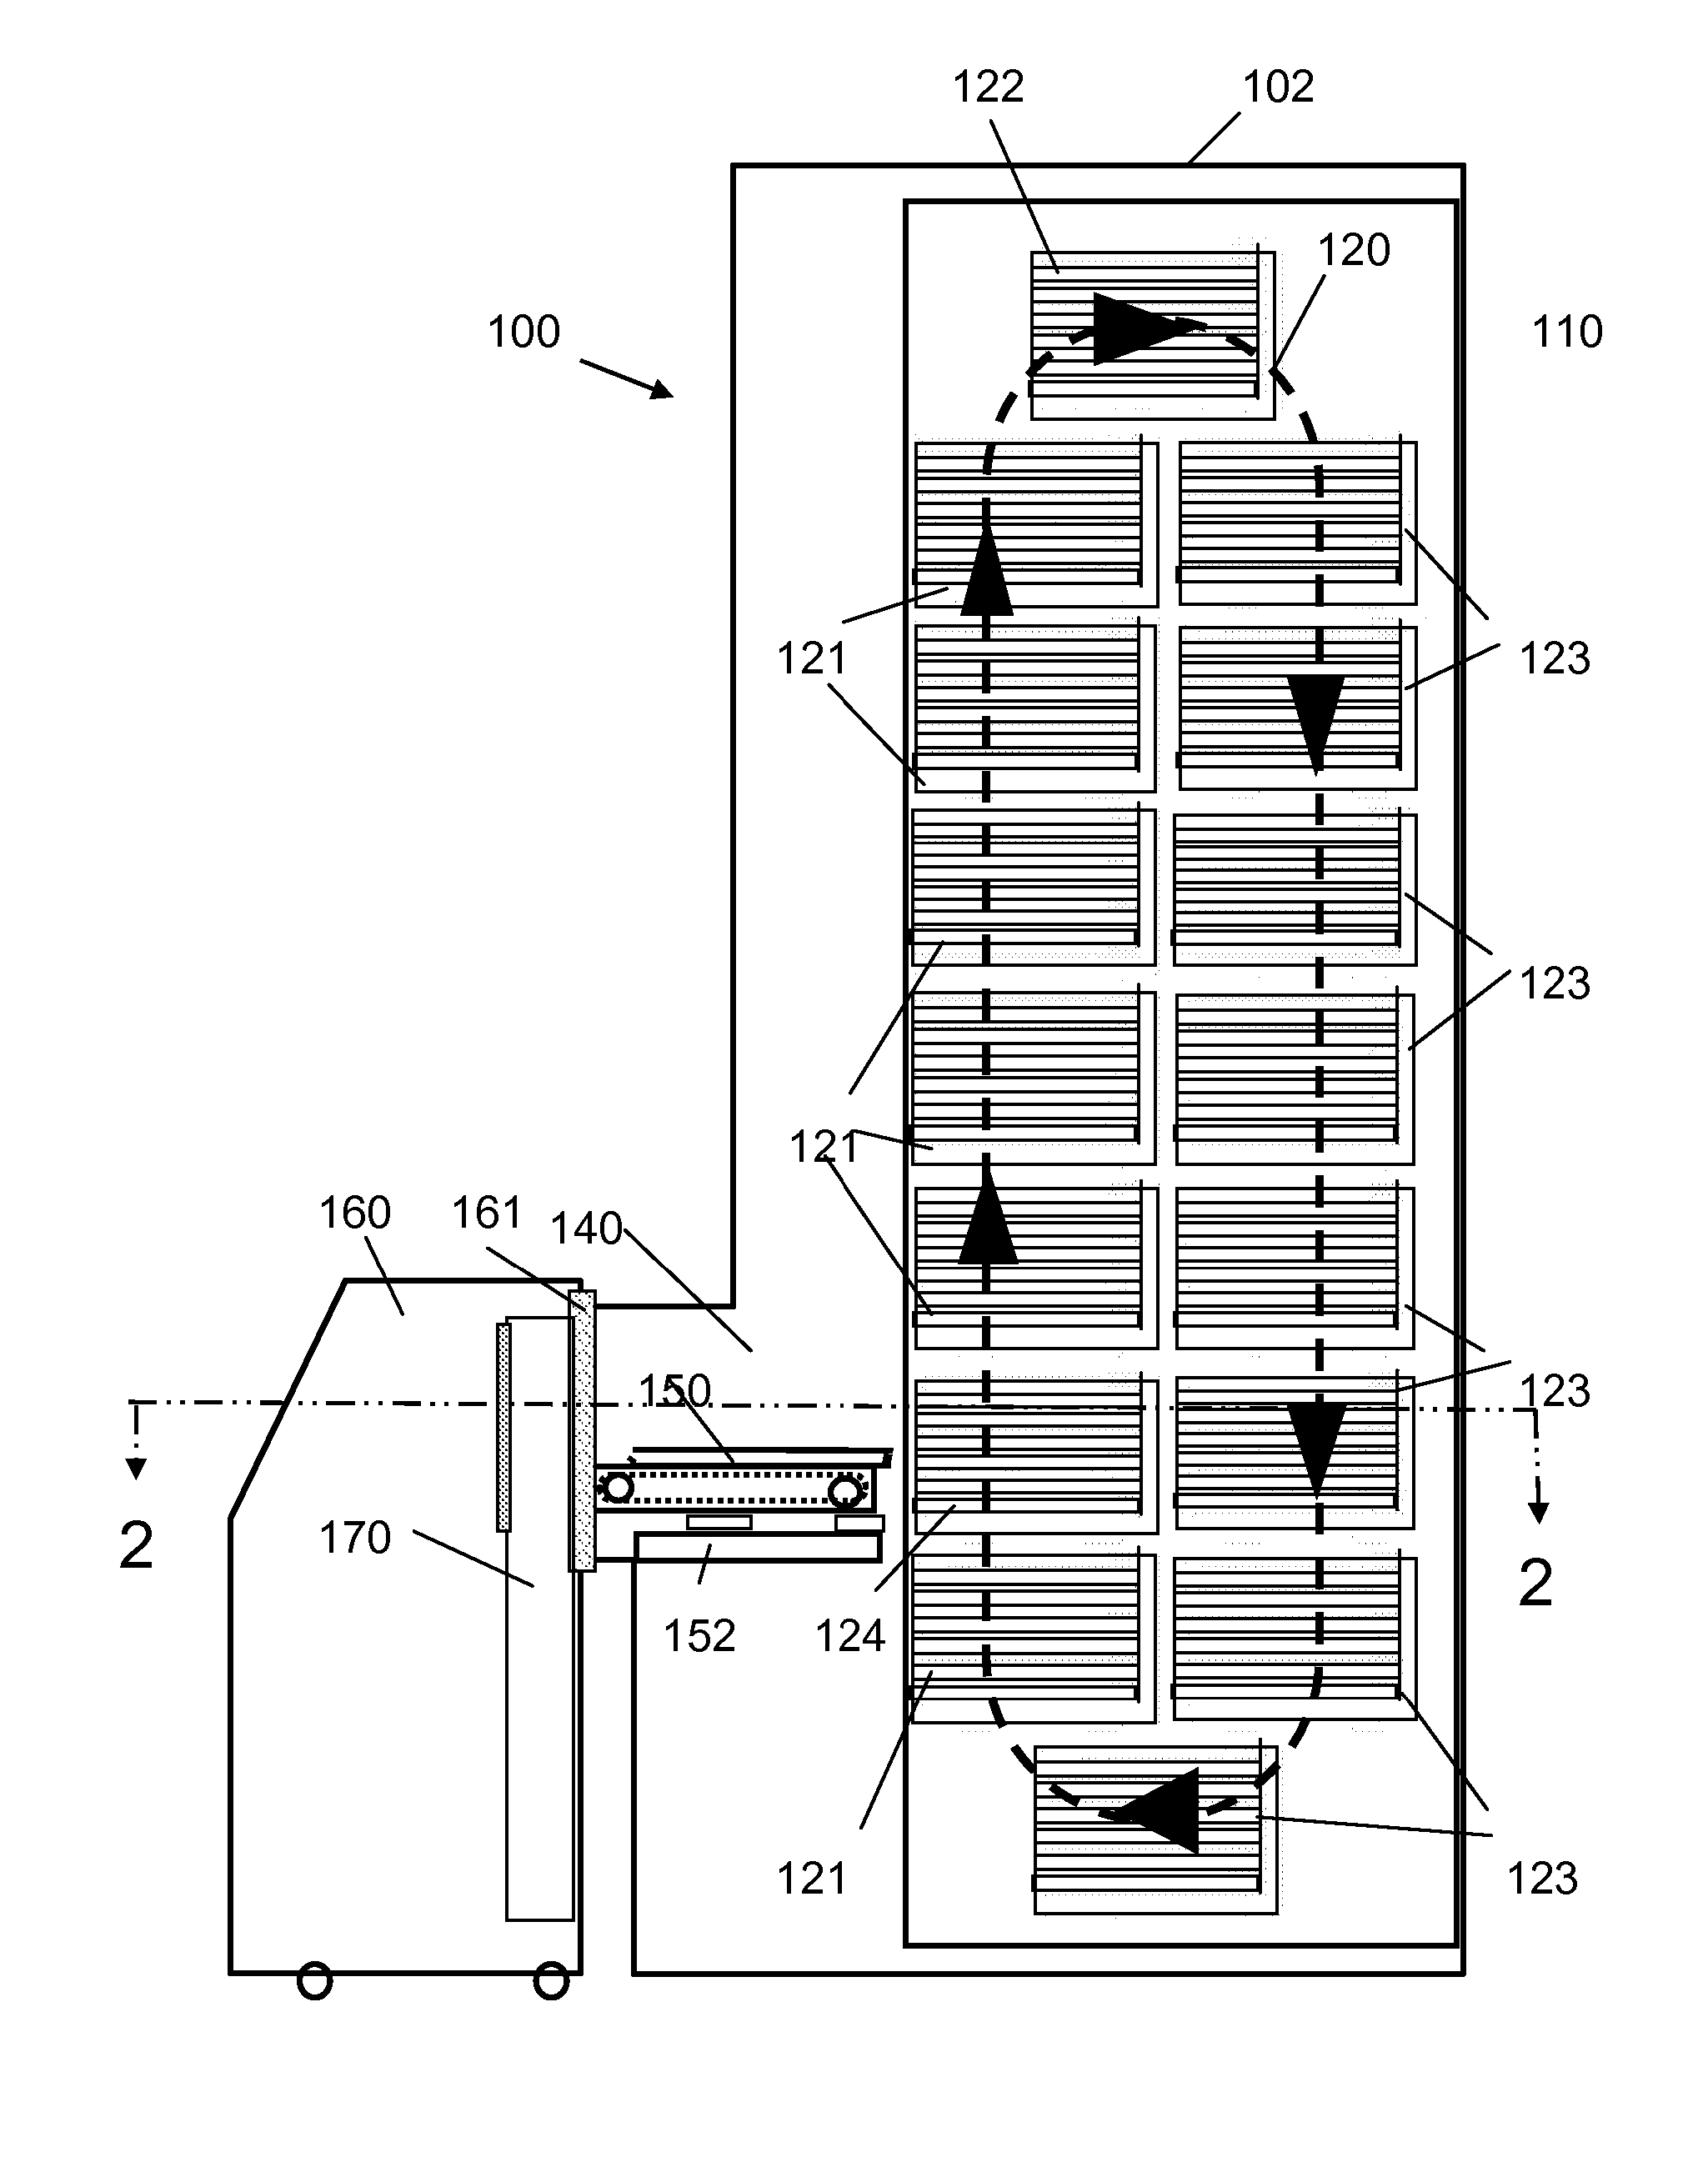 System and method for selectively extracting individual vials from an array of vials within a rack